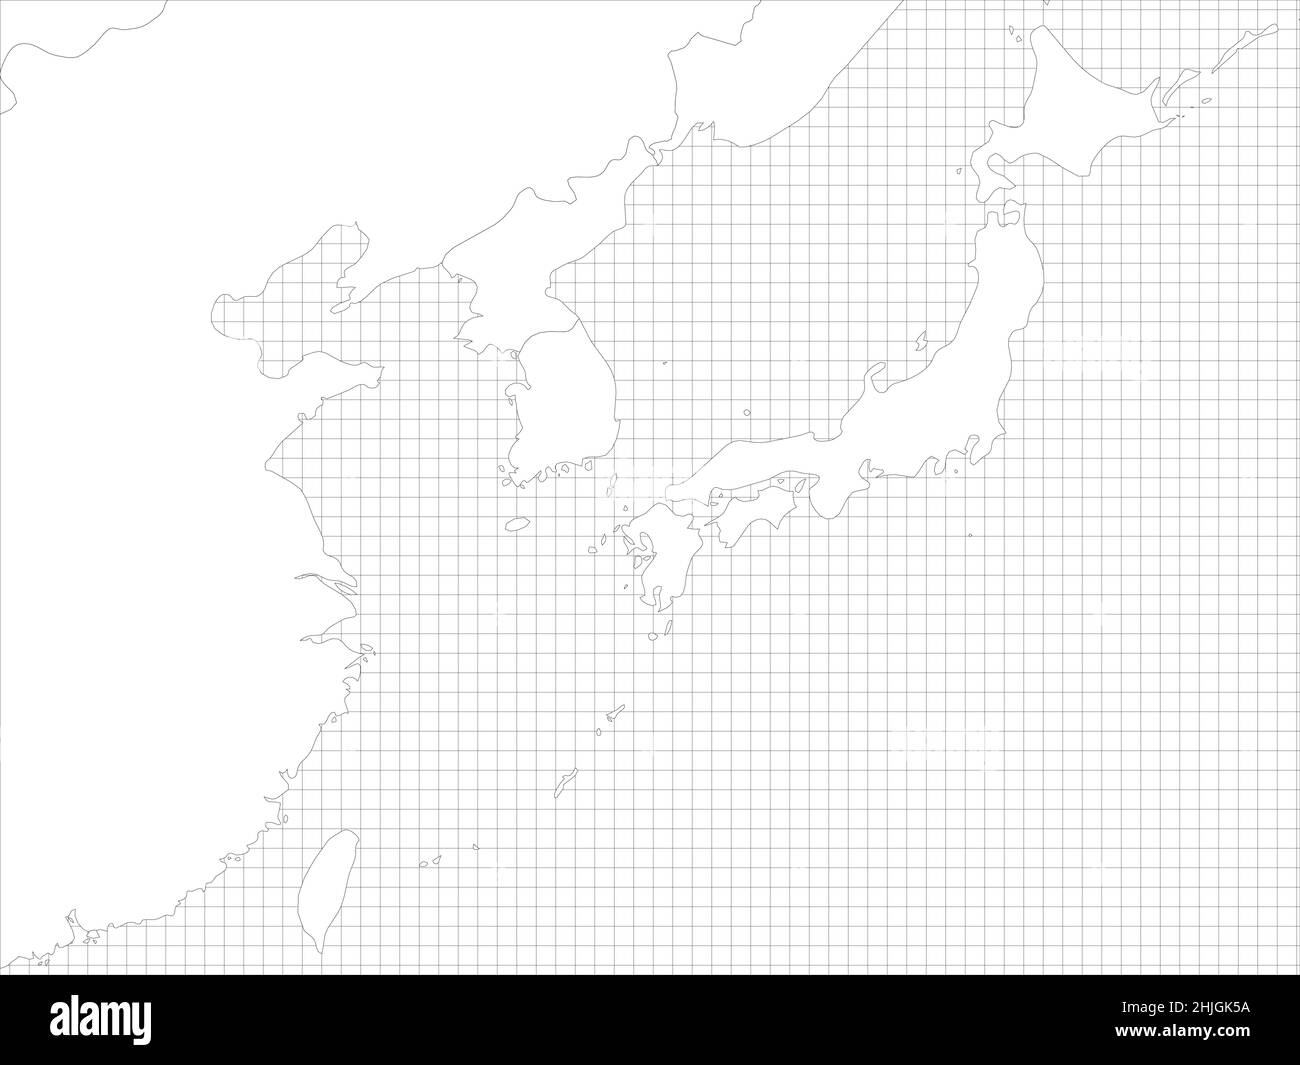 East Asia simple outline blank map Stock Vector